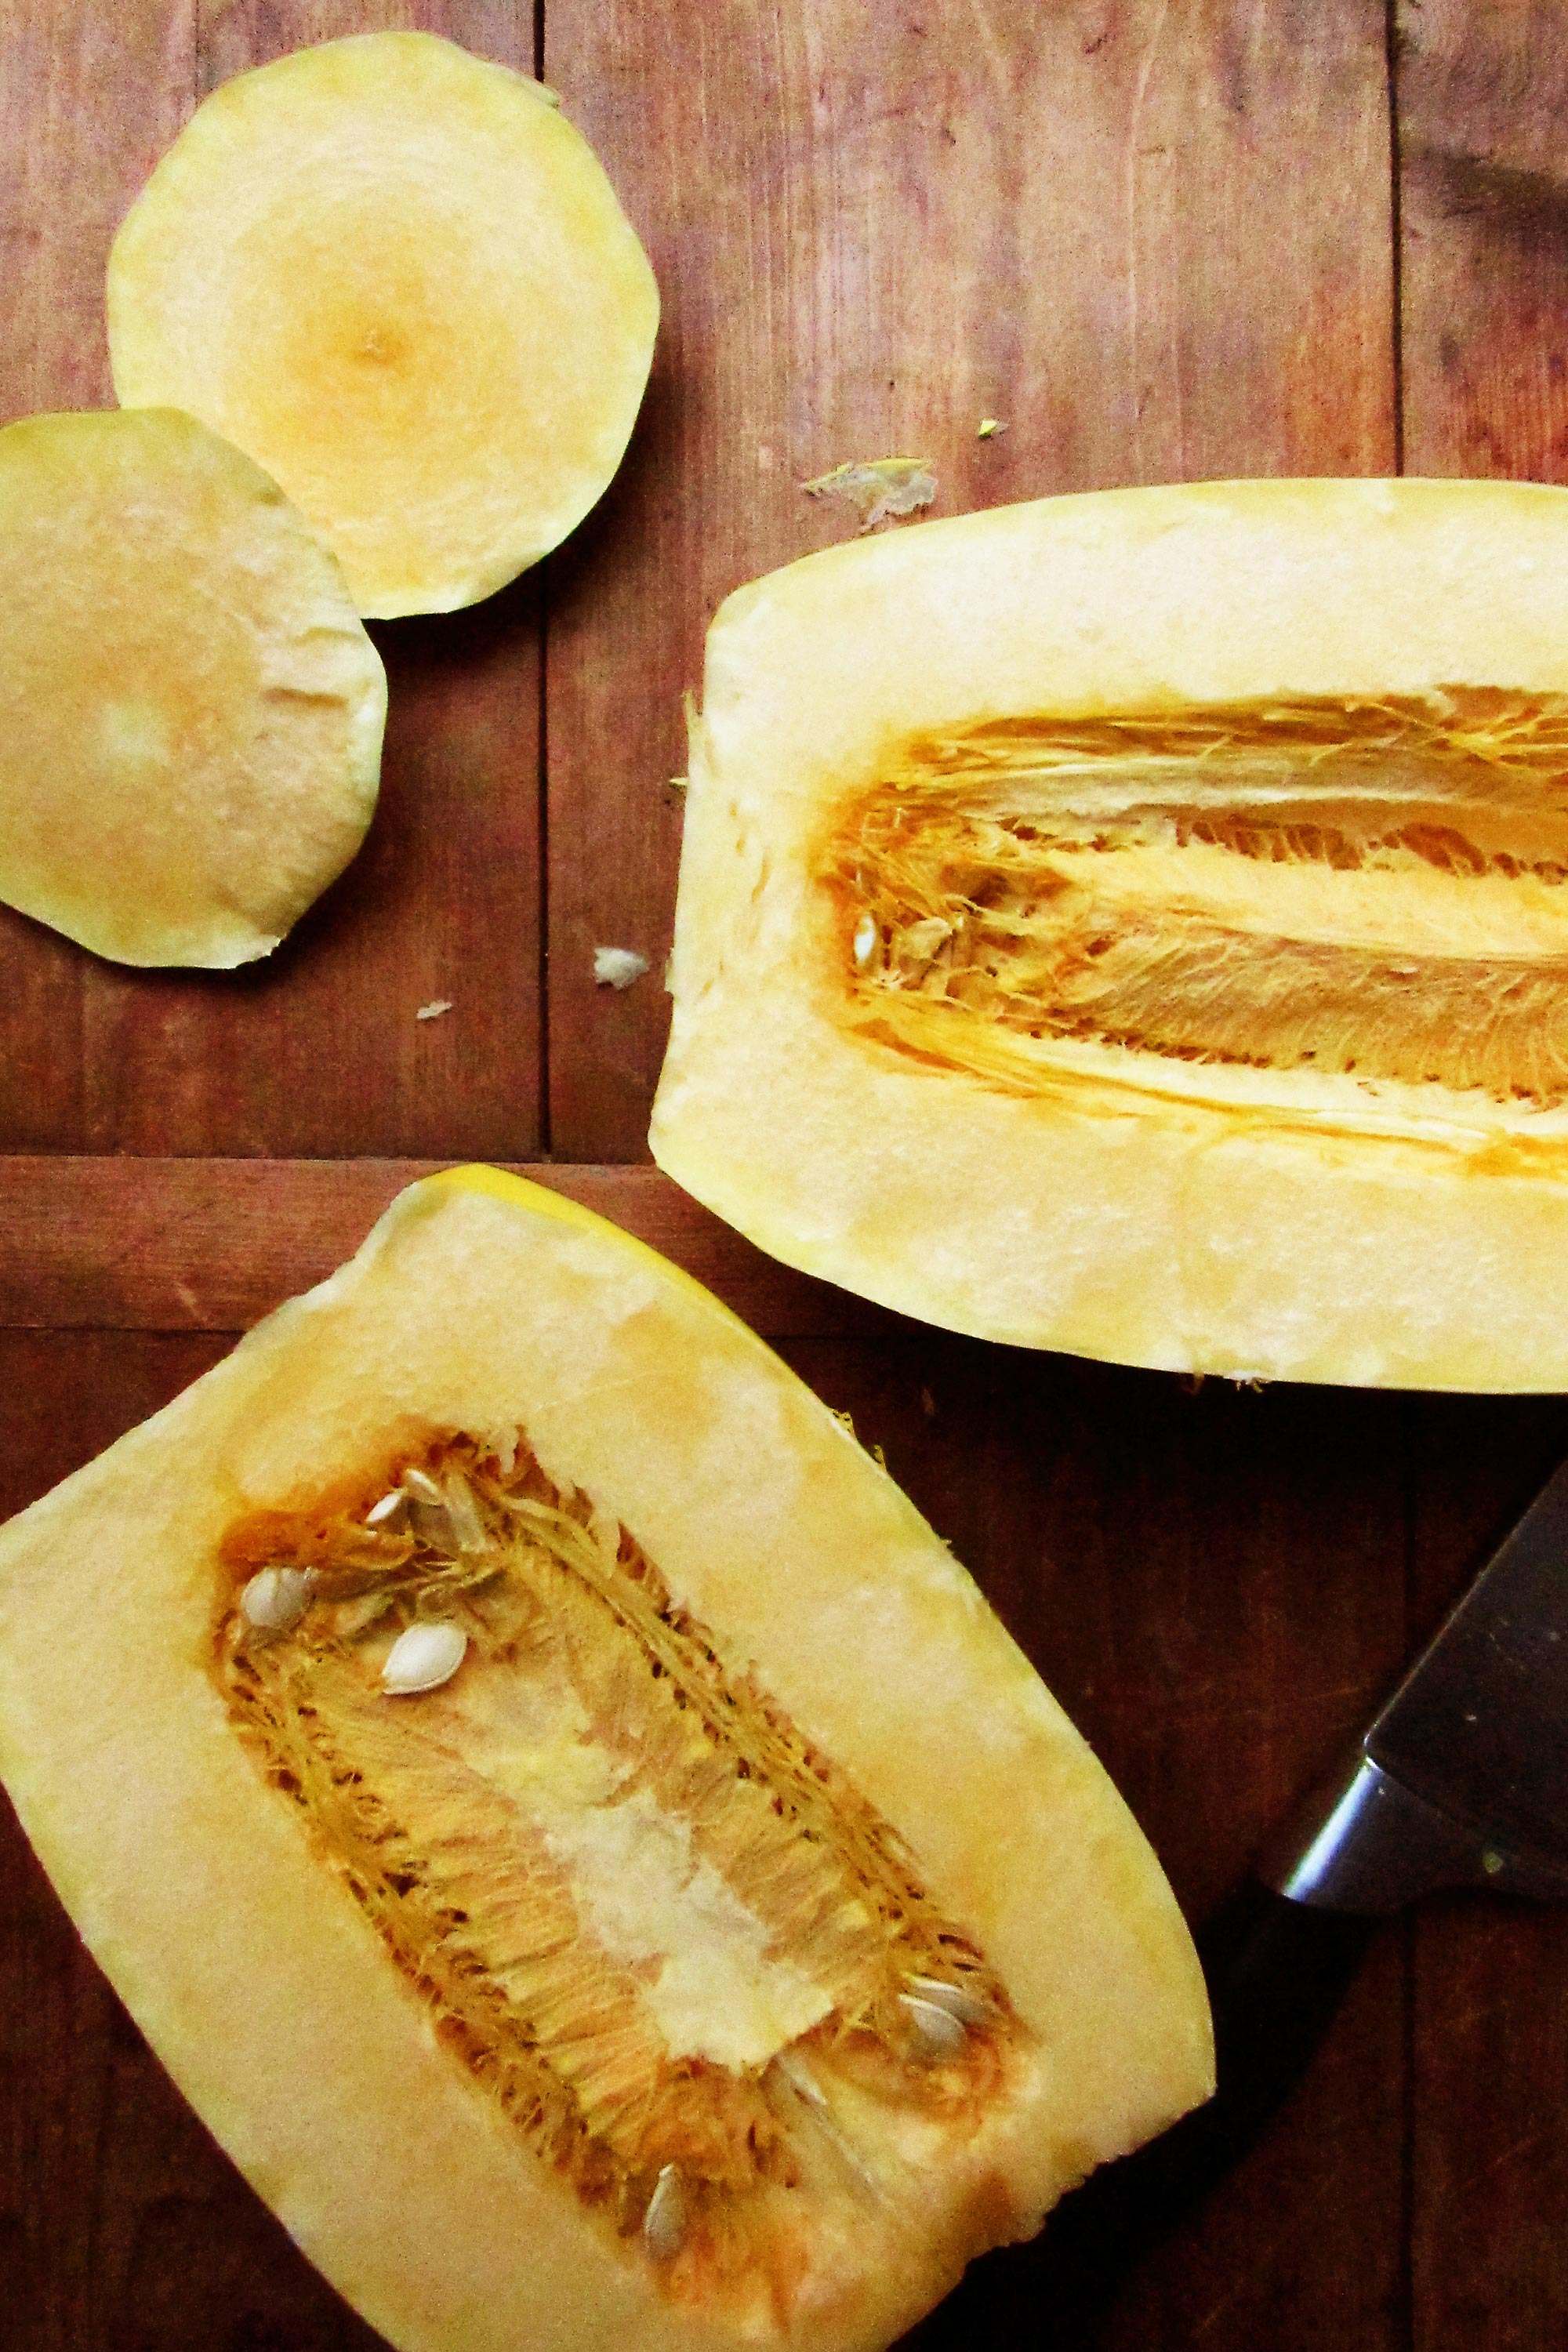 Halved spaghetti squash on a wooden surface.